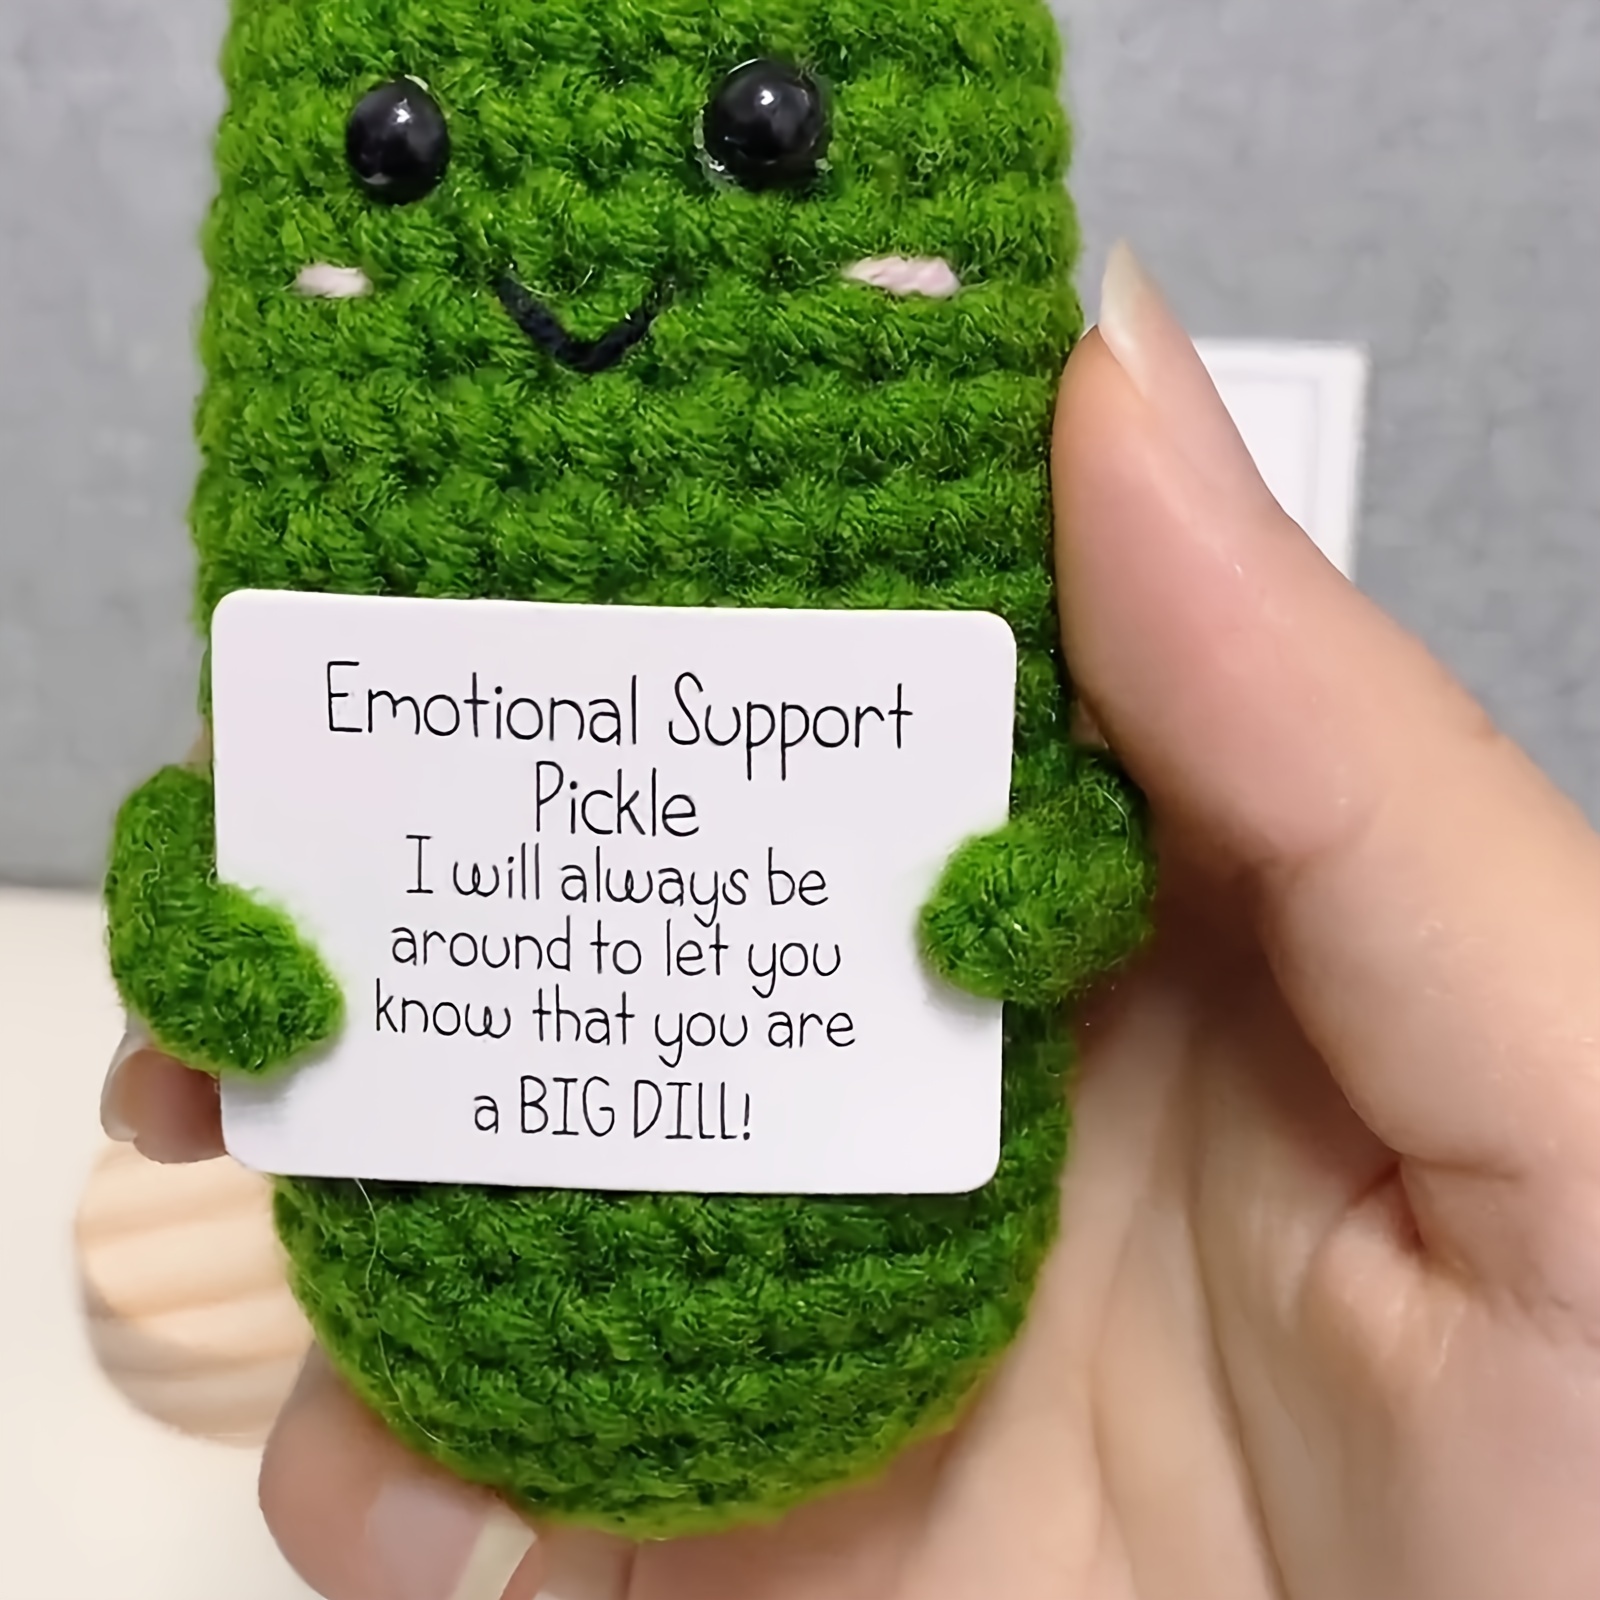 Handmade Emotional Support Pickled Cucumber Gift, Handmade Crochet  Emotional Support Pickles with Wooden Base, Cute Crochet Pickled Cucumber  Knitting Doll, Christmas Pickle Ornament Gift 